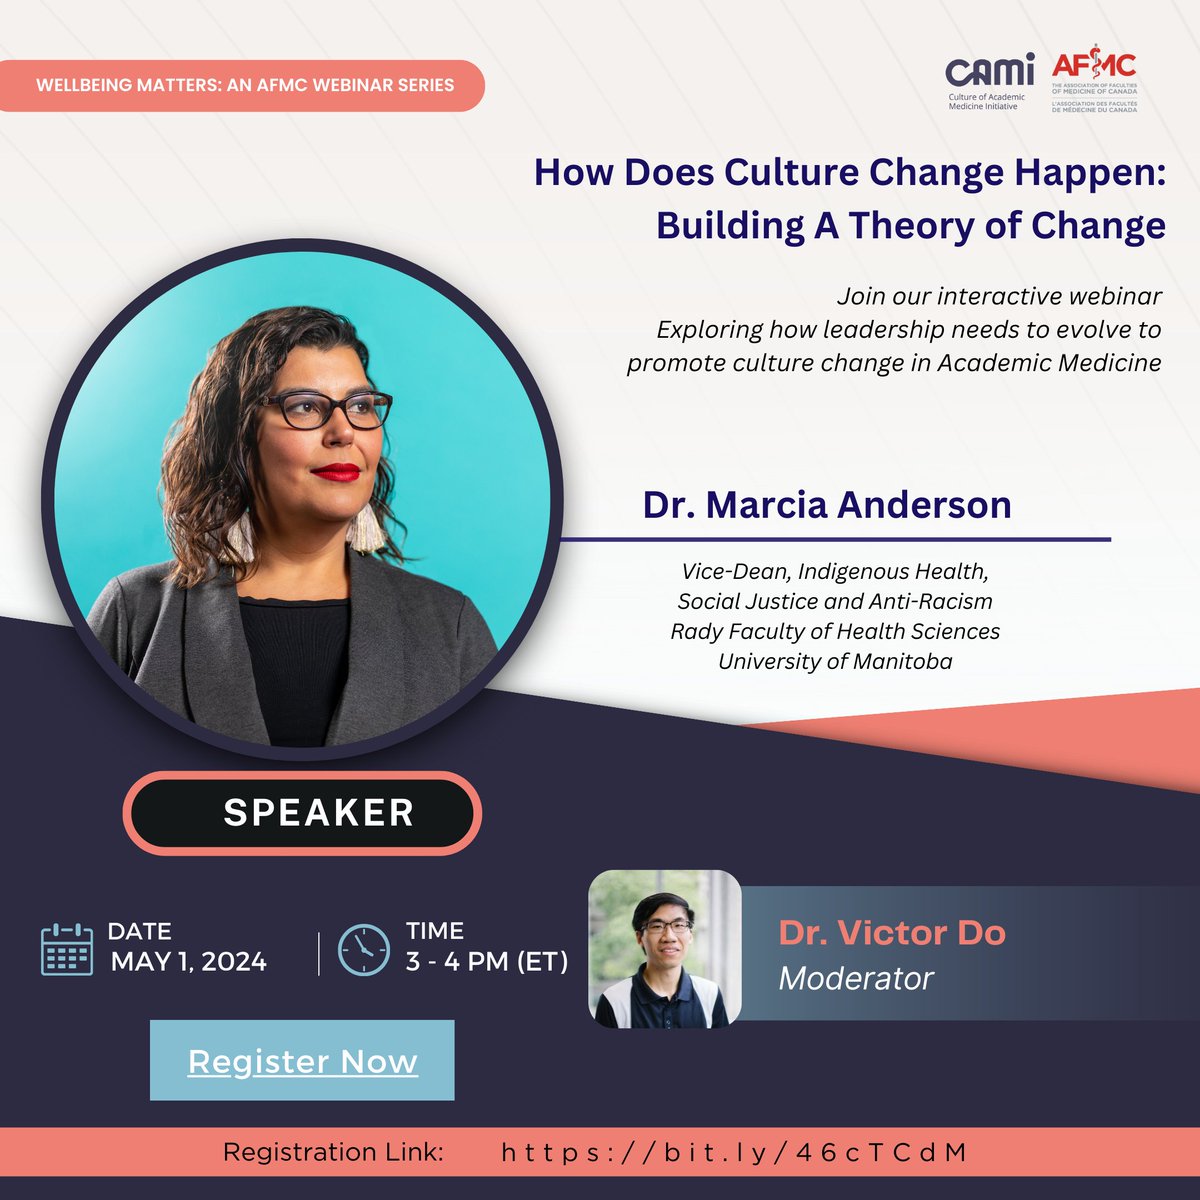 Ready to explore the intersection of leadership and culture change in #AcademicMedicine? Our webinar with @MarciaJAnderson is happening on May 1st! Registration is up and running. Register today and be part of this transformative discussion! bit.ly/46cTCdM #MedEd #CAMi